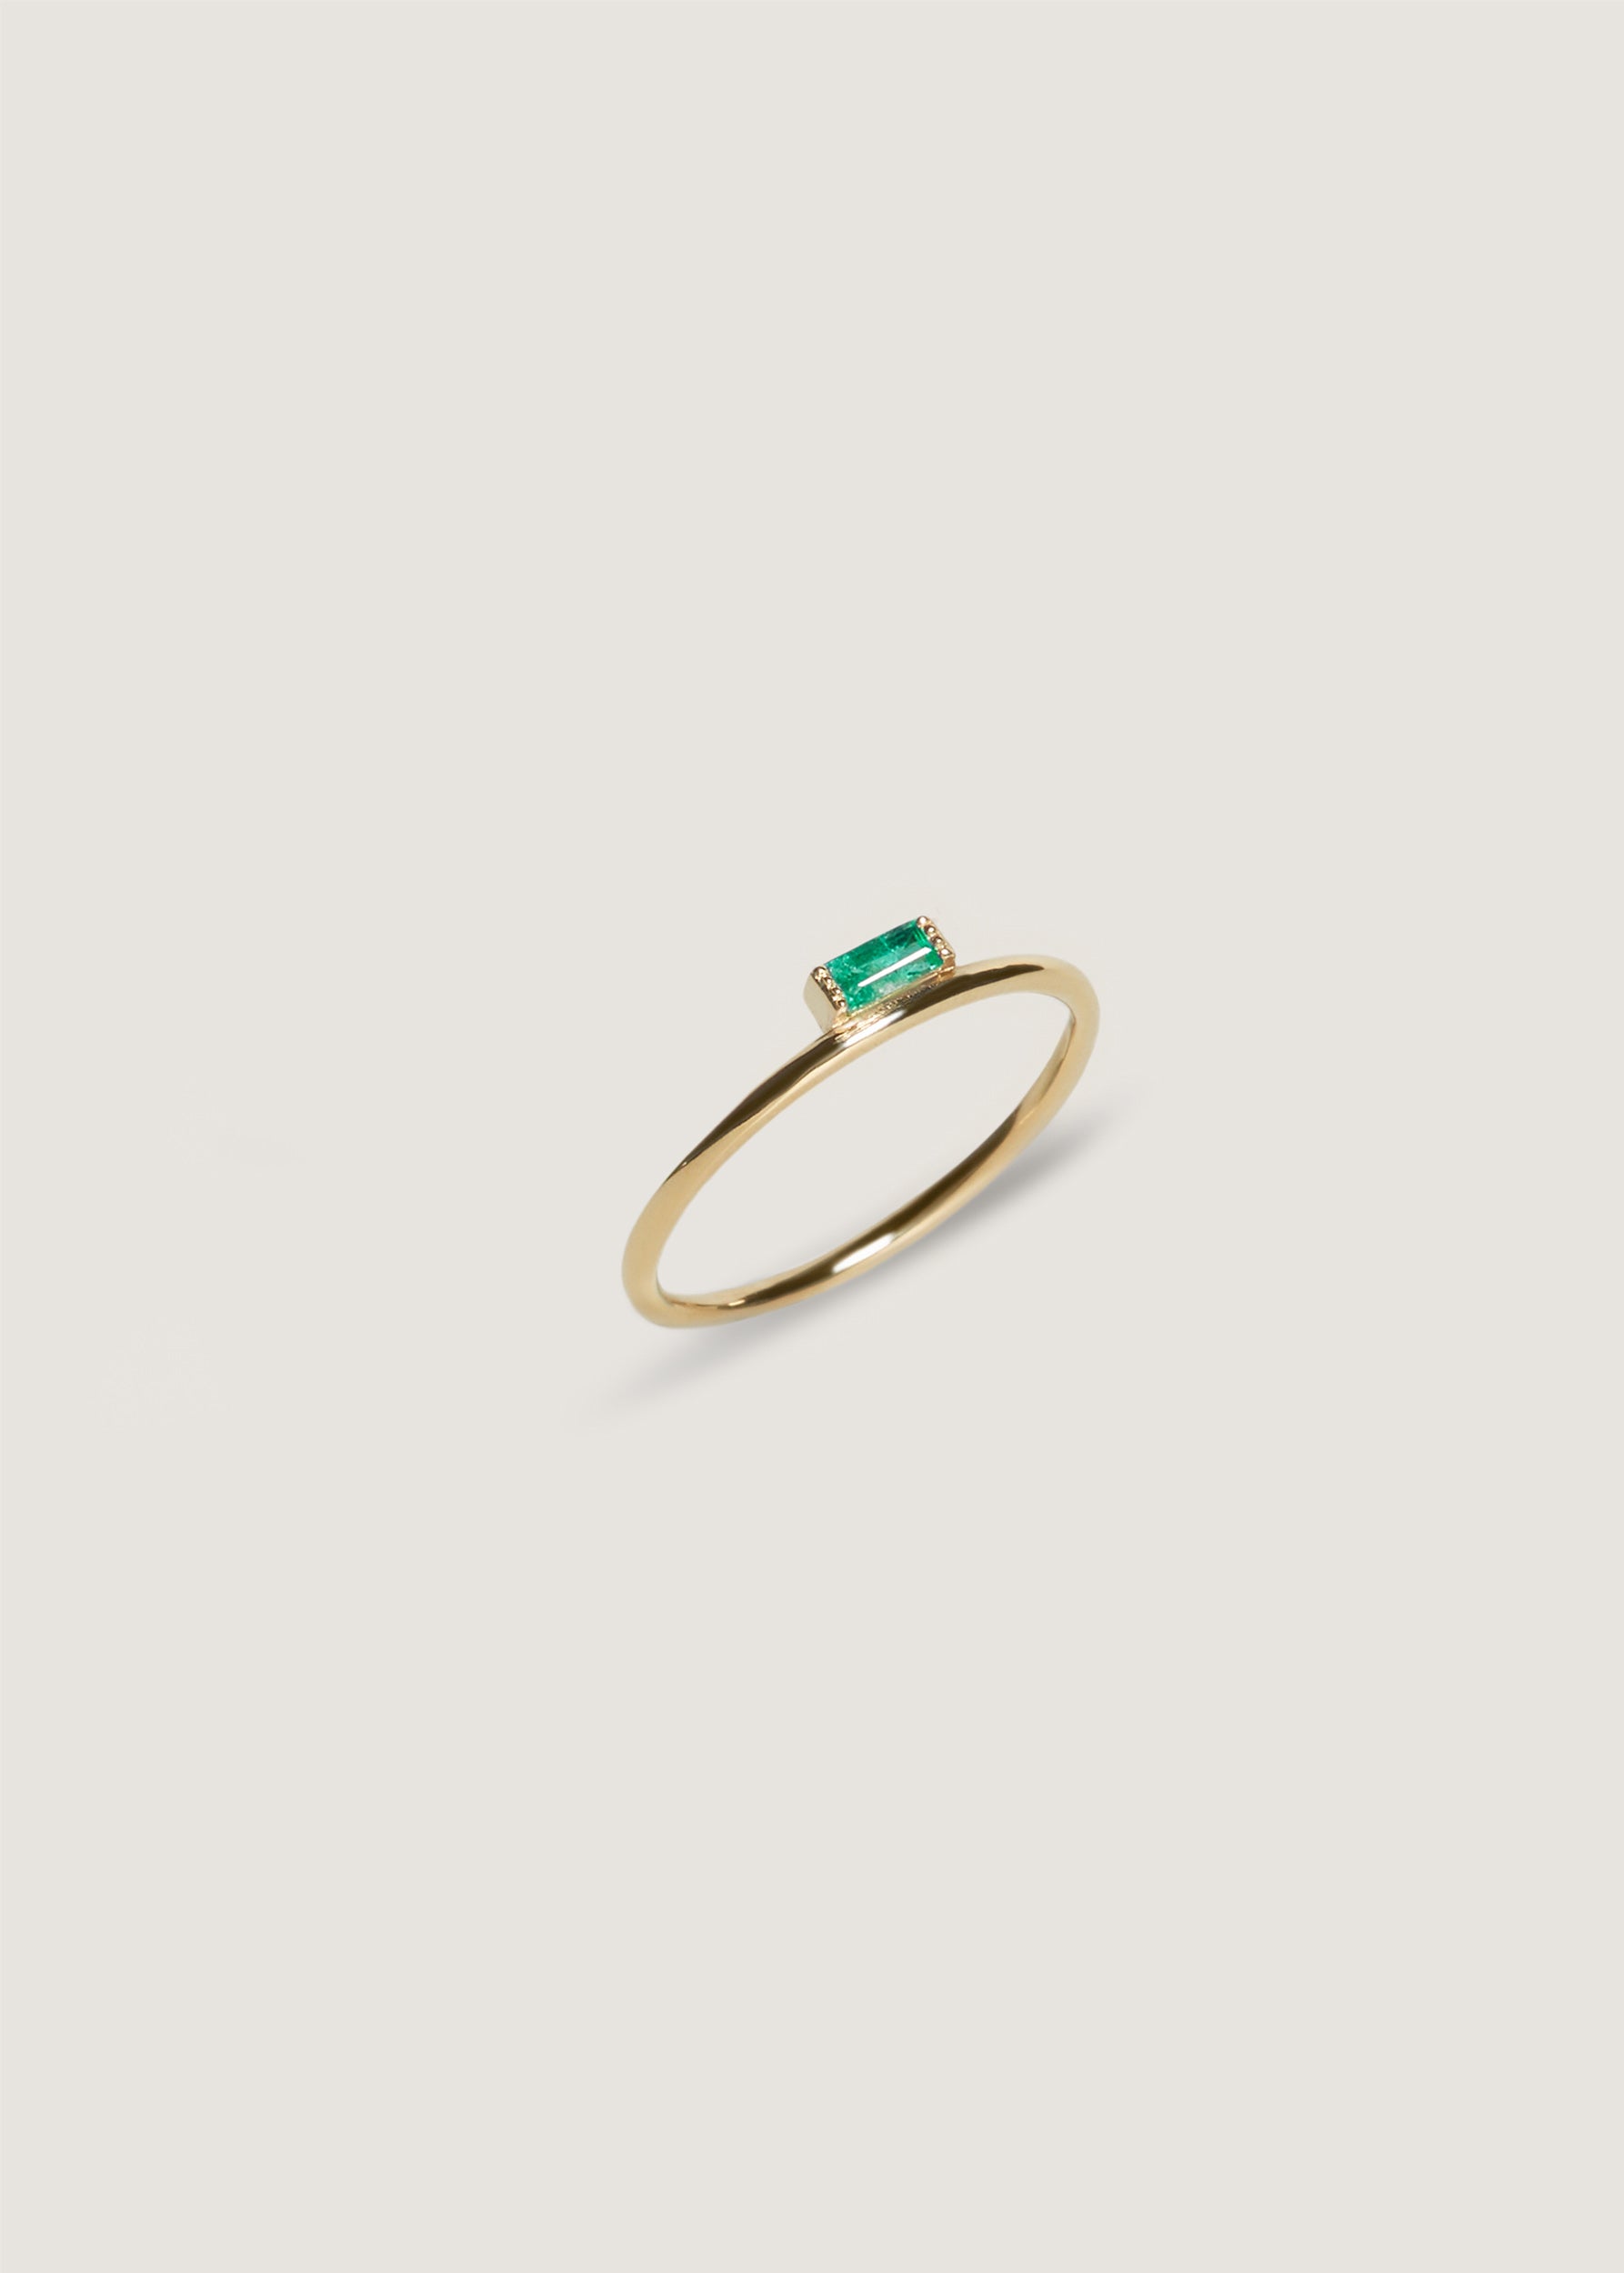 alt="Mother's Ring - Emerald"